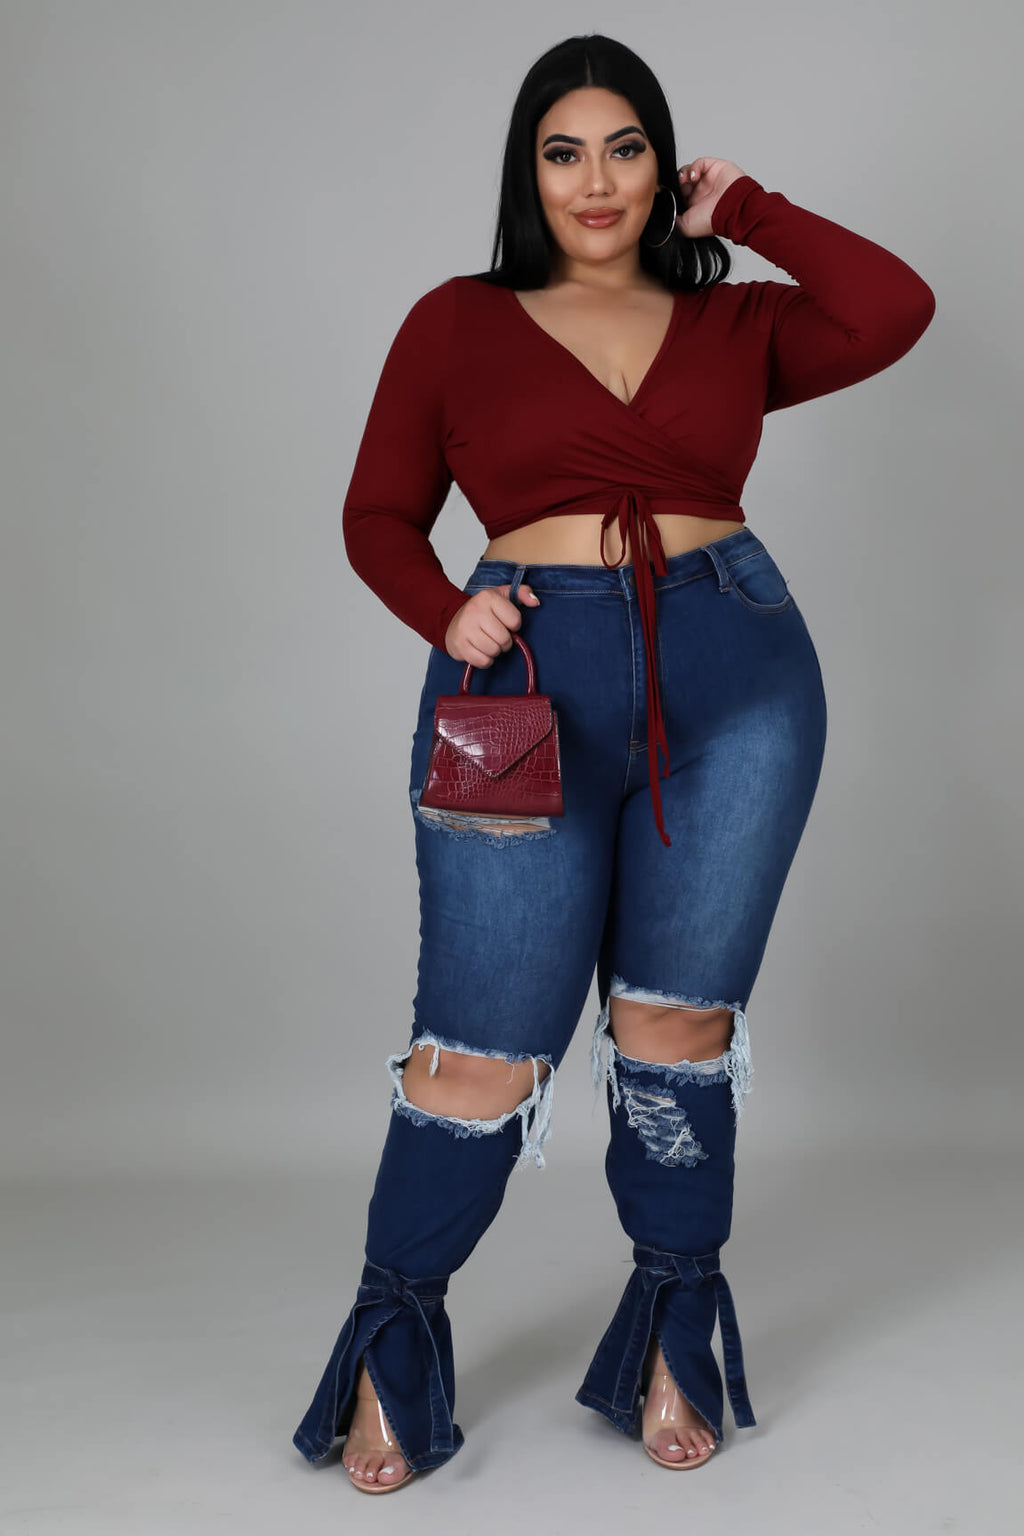 Str8 Poppin Tagz Boss Babe Jeans M / Red